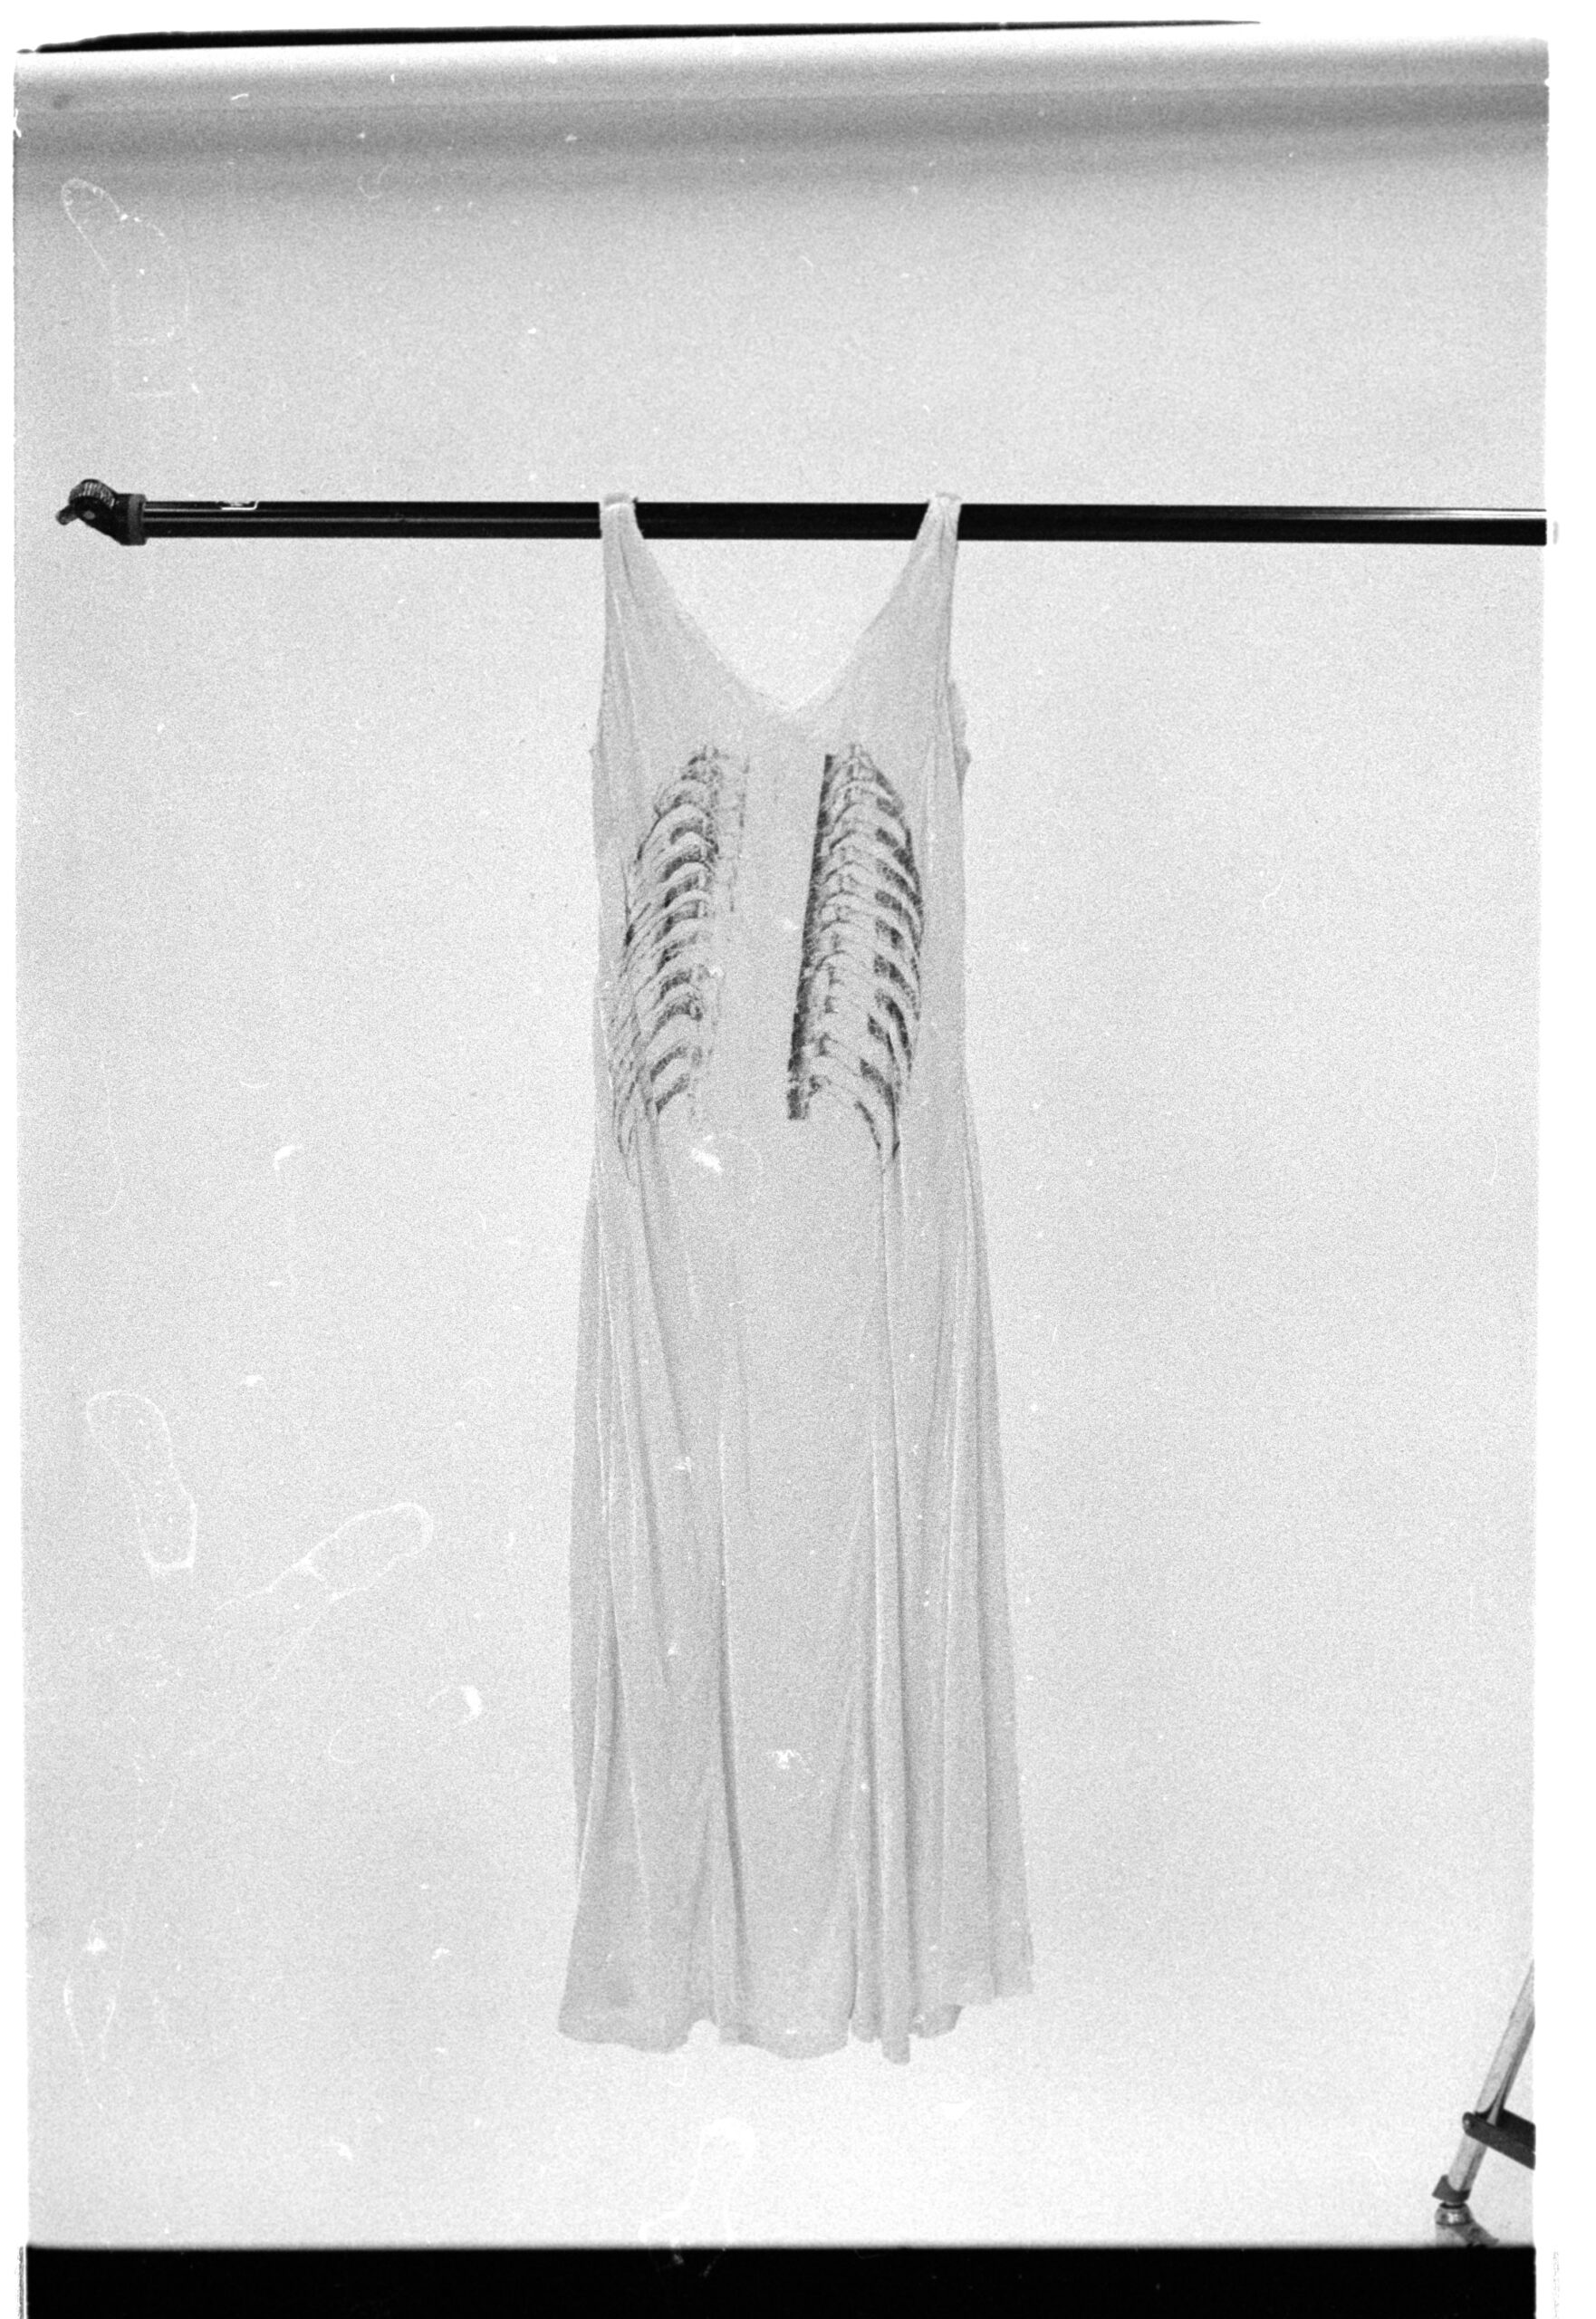 dress with rib cage printed on the back, hung on a rod